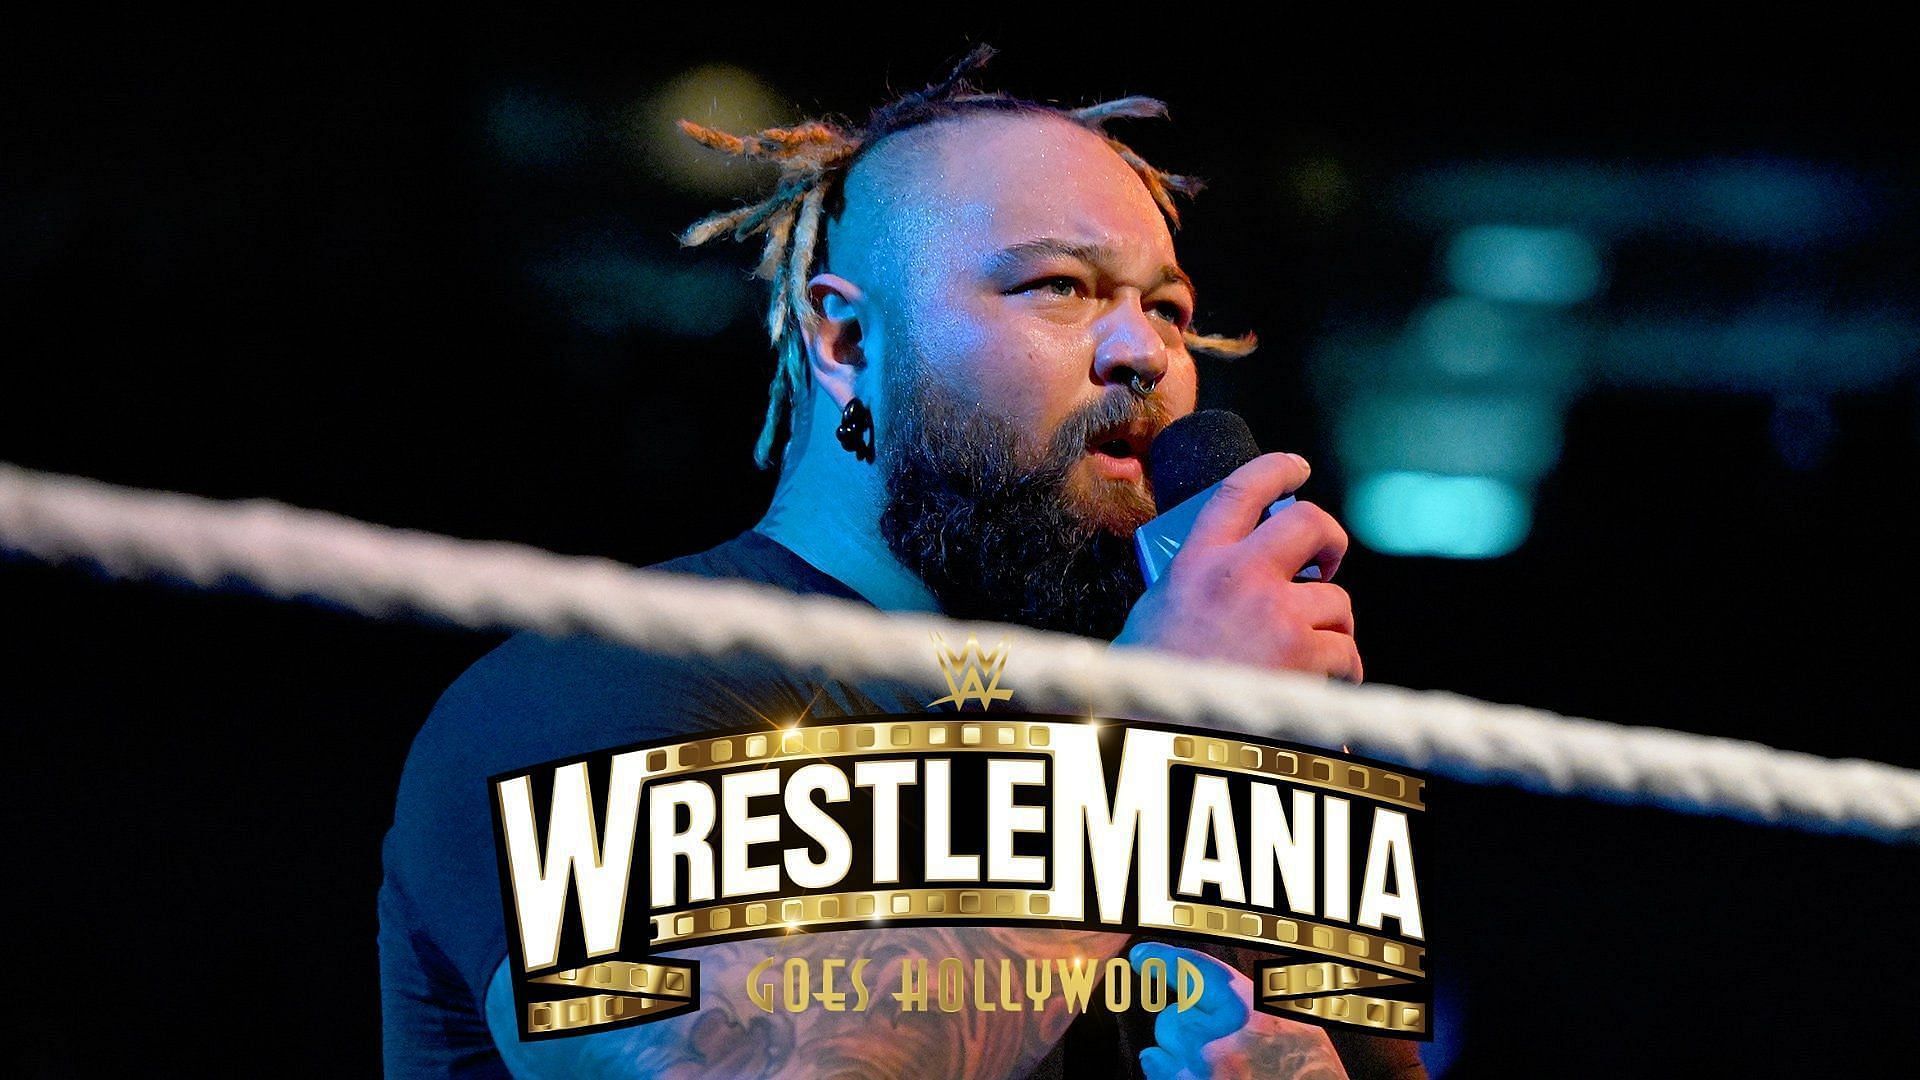 Bray Wyatt is looking for his road to WrestleMania